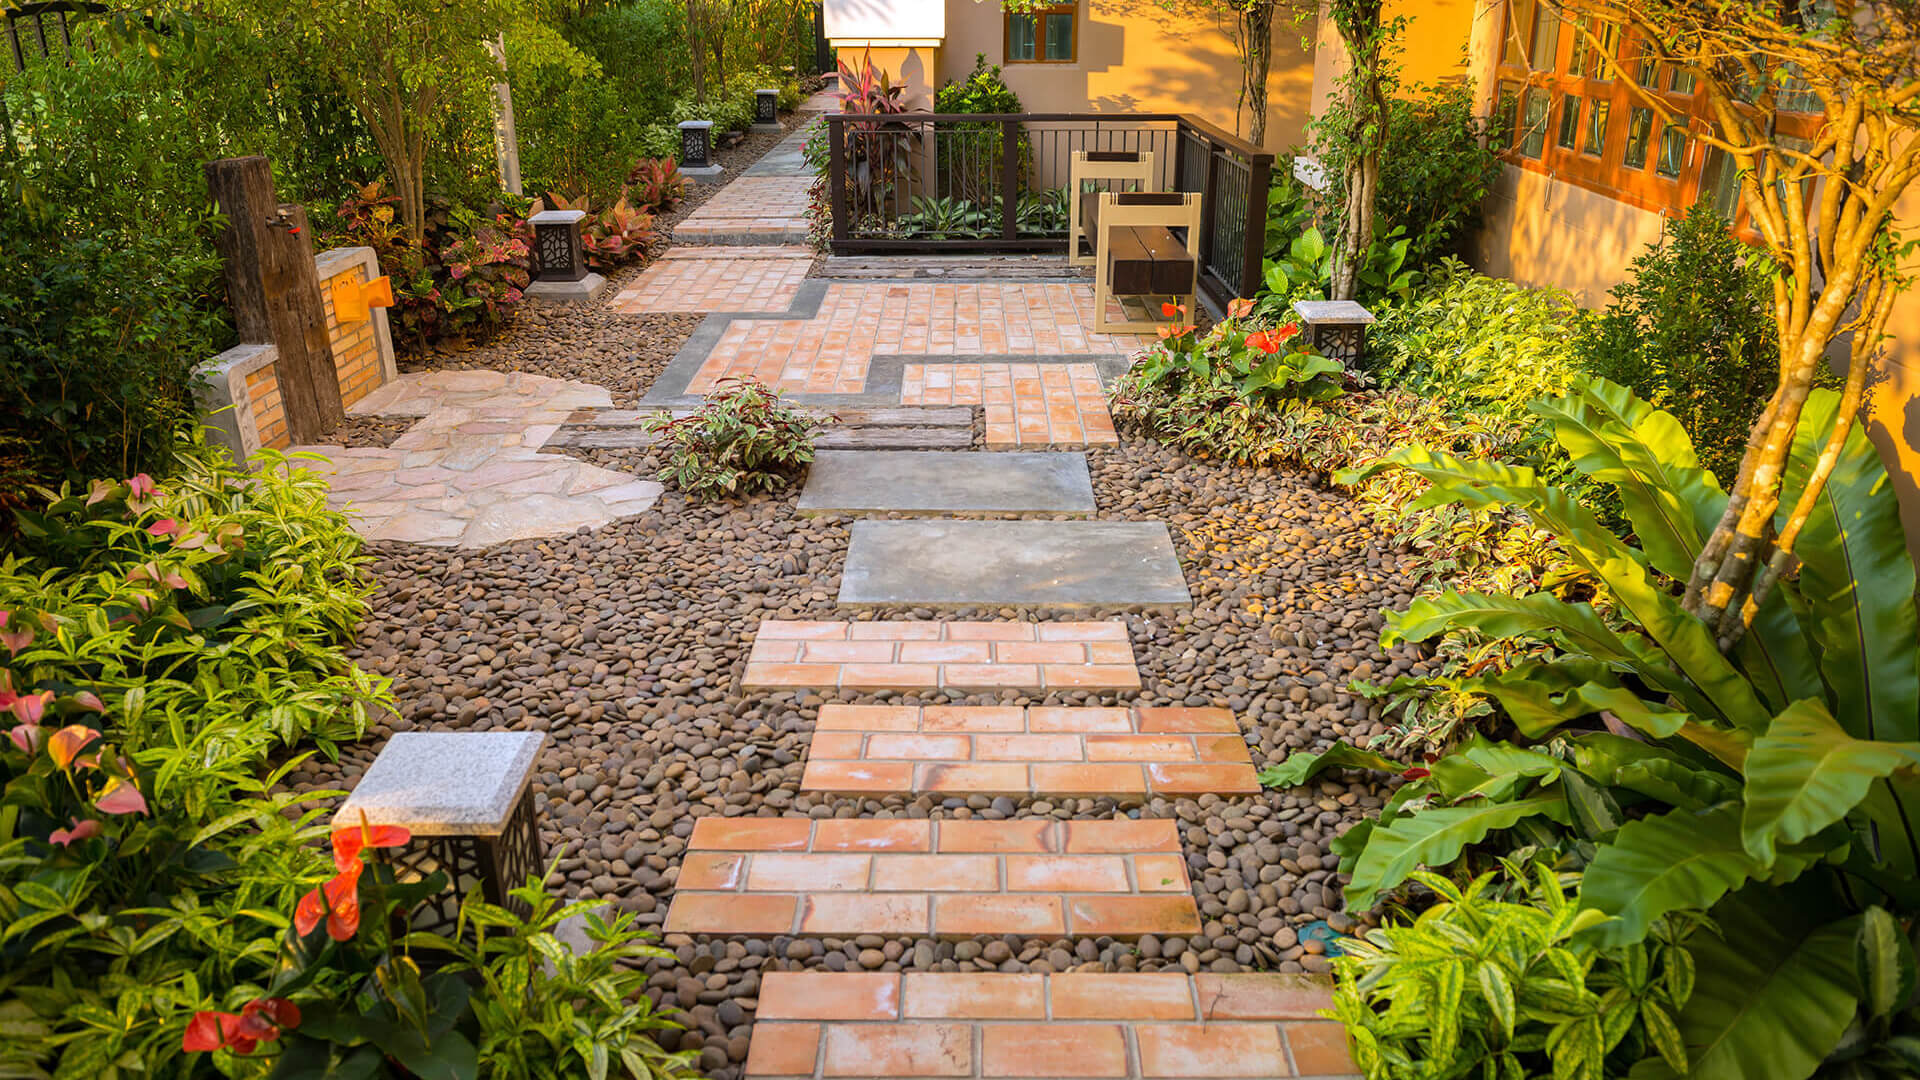 Xeriscape Your Yard to Save Time & Money - Serbu Sand & Gravel